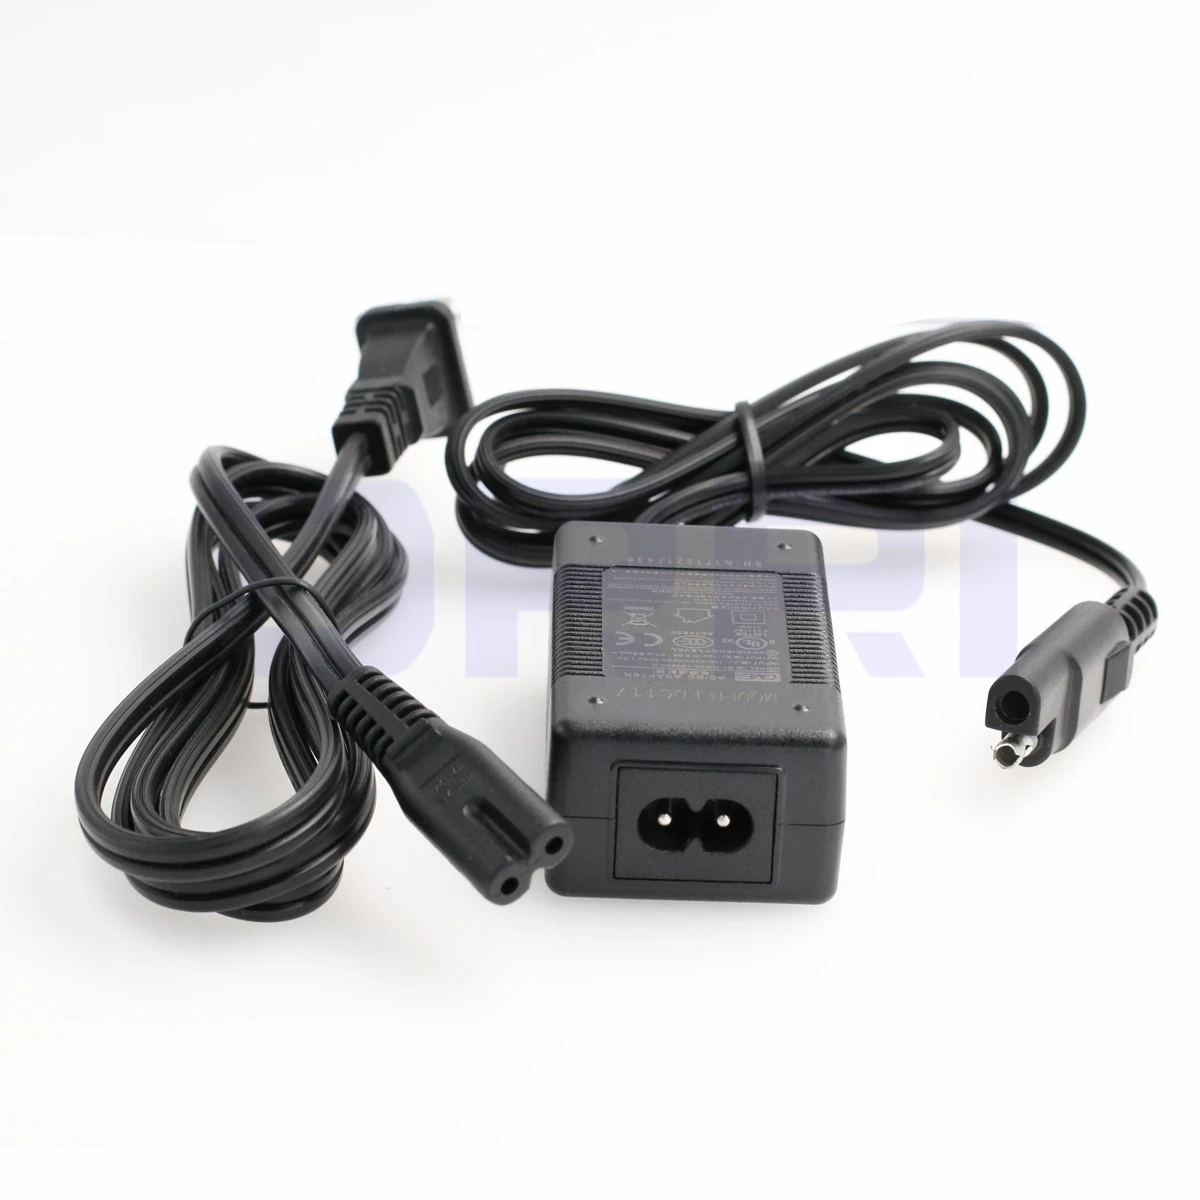 Power Cable with charger adapter for Topcon GPS HiPer to SAE 2-pin connector 